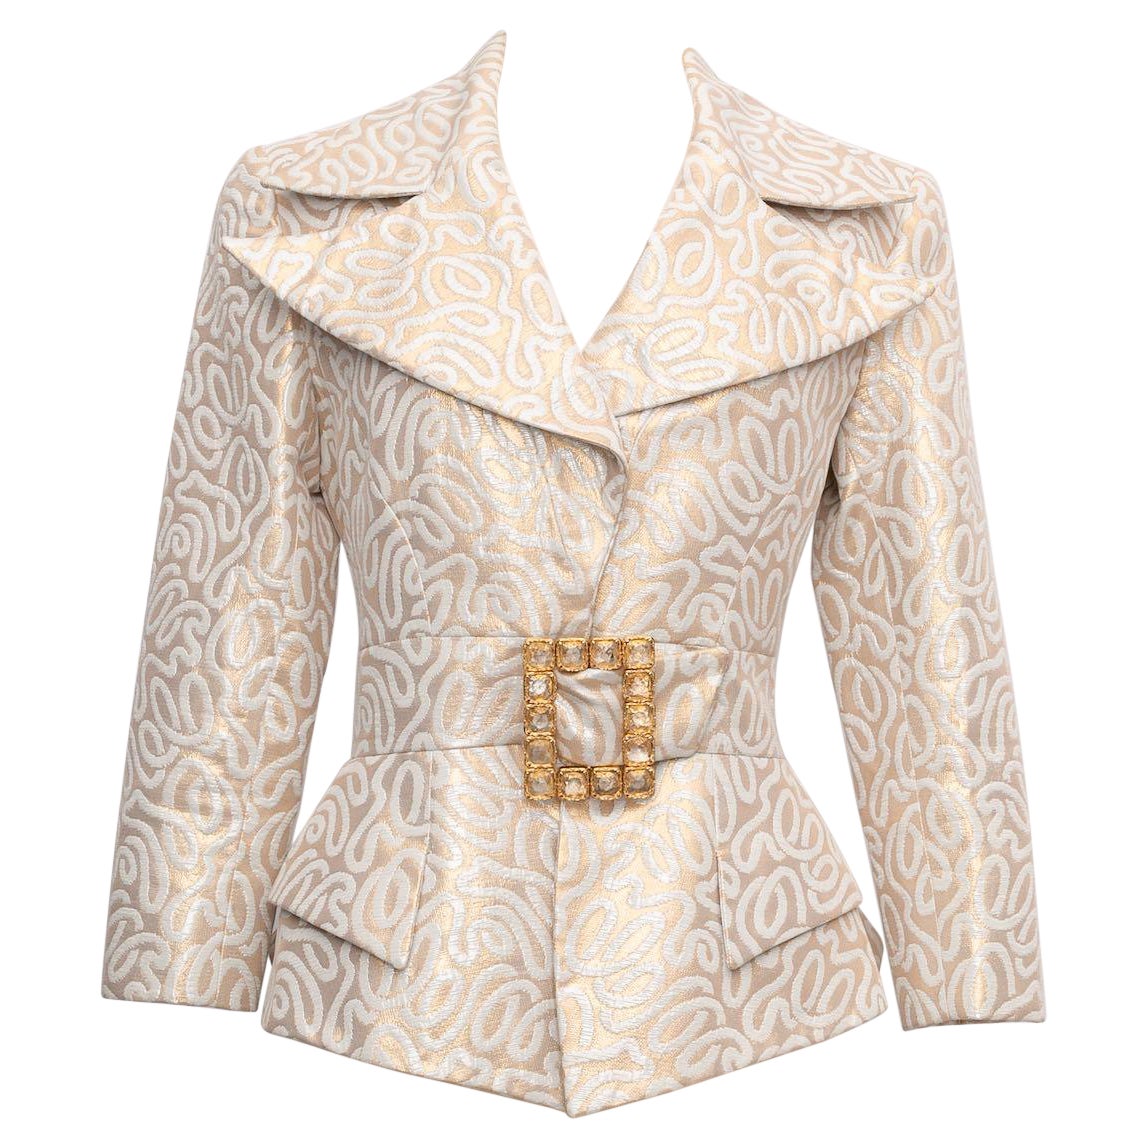 Ted Lapidus Haute Couture Brocade Jacket Overstitched with Golden Threads For Sale